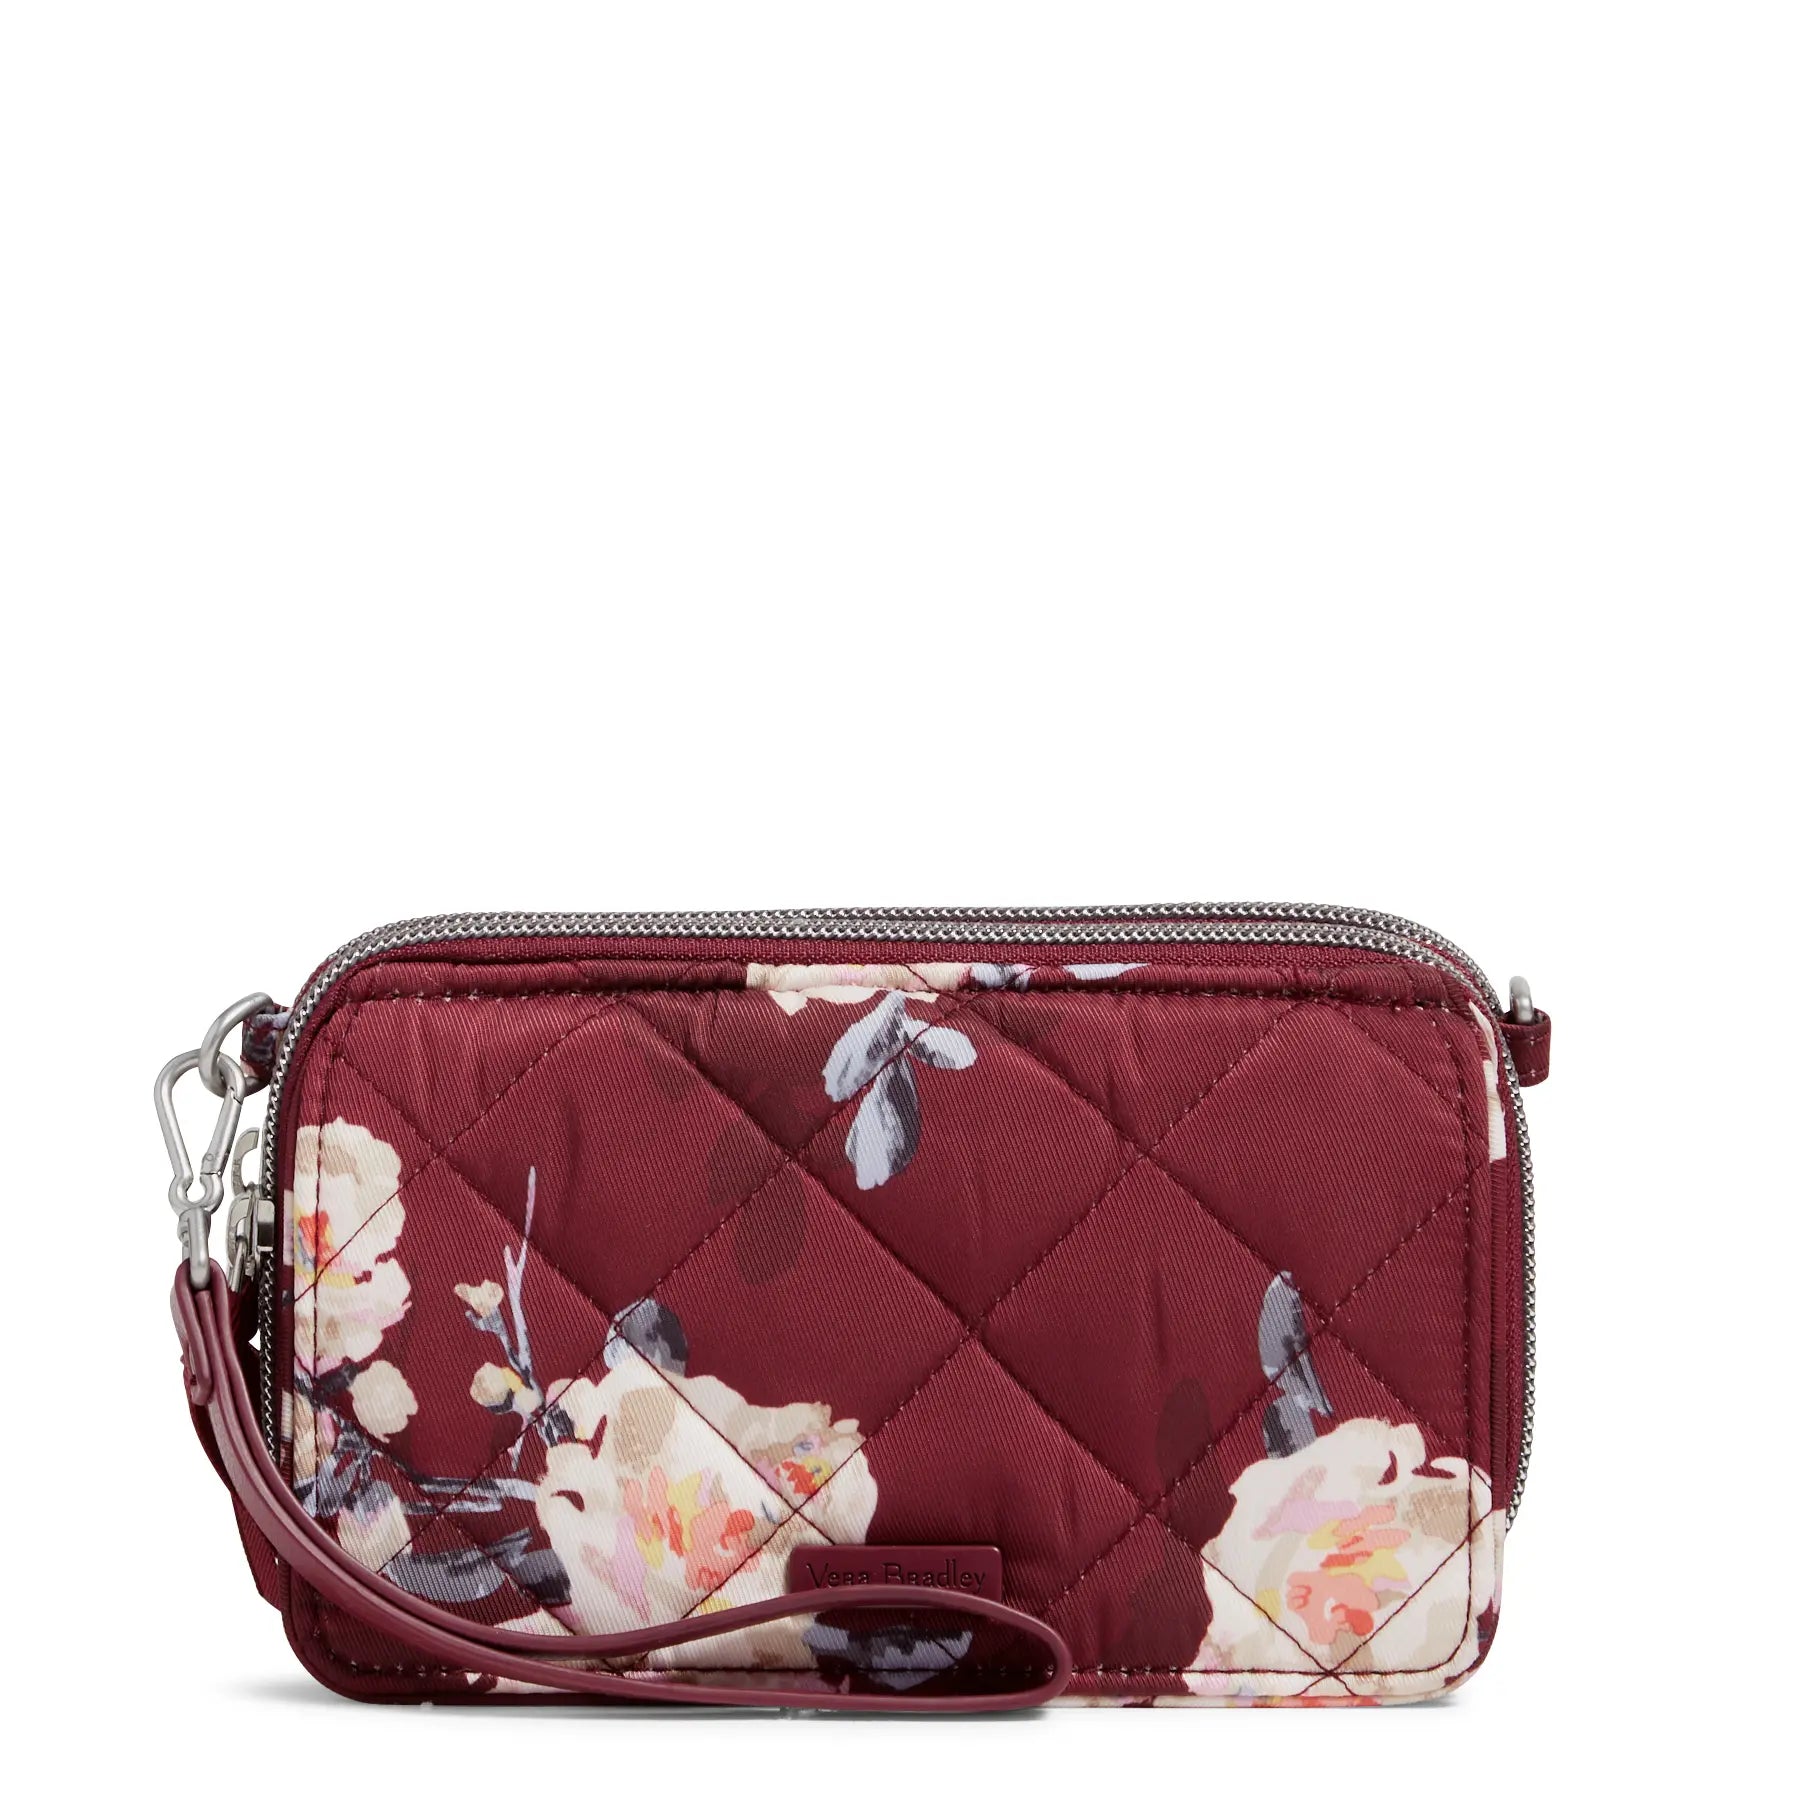 Vera Bradley RFID All in One Crossbody in Blooms and Branches.